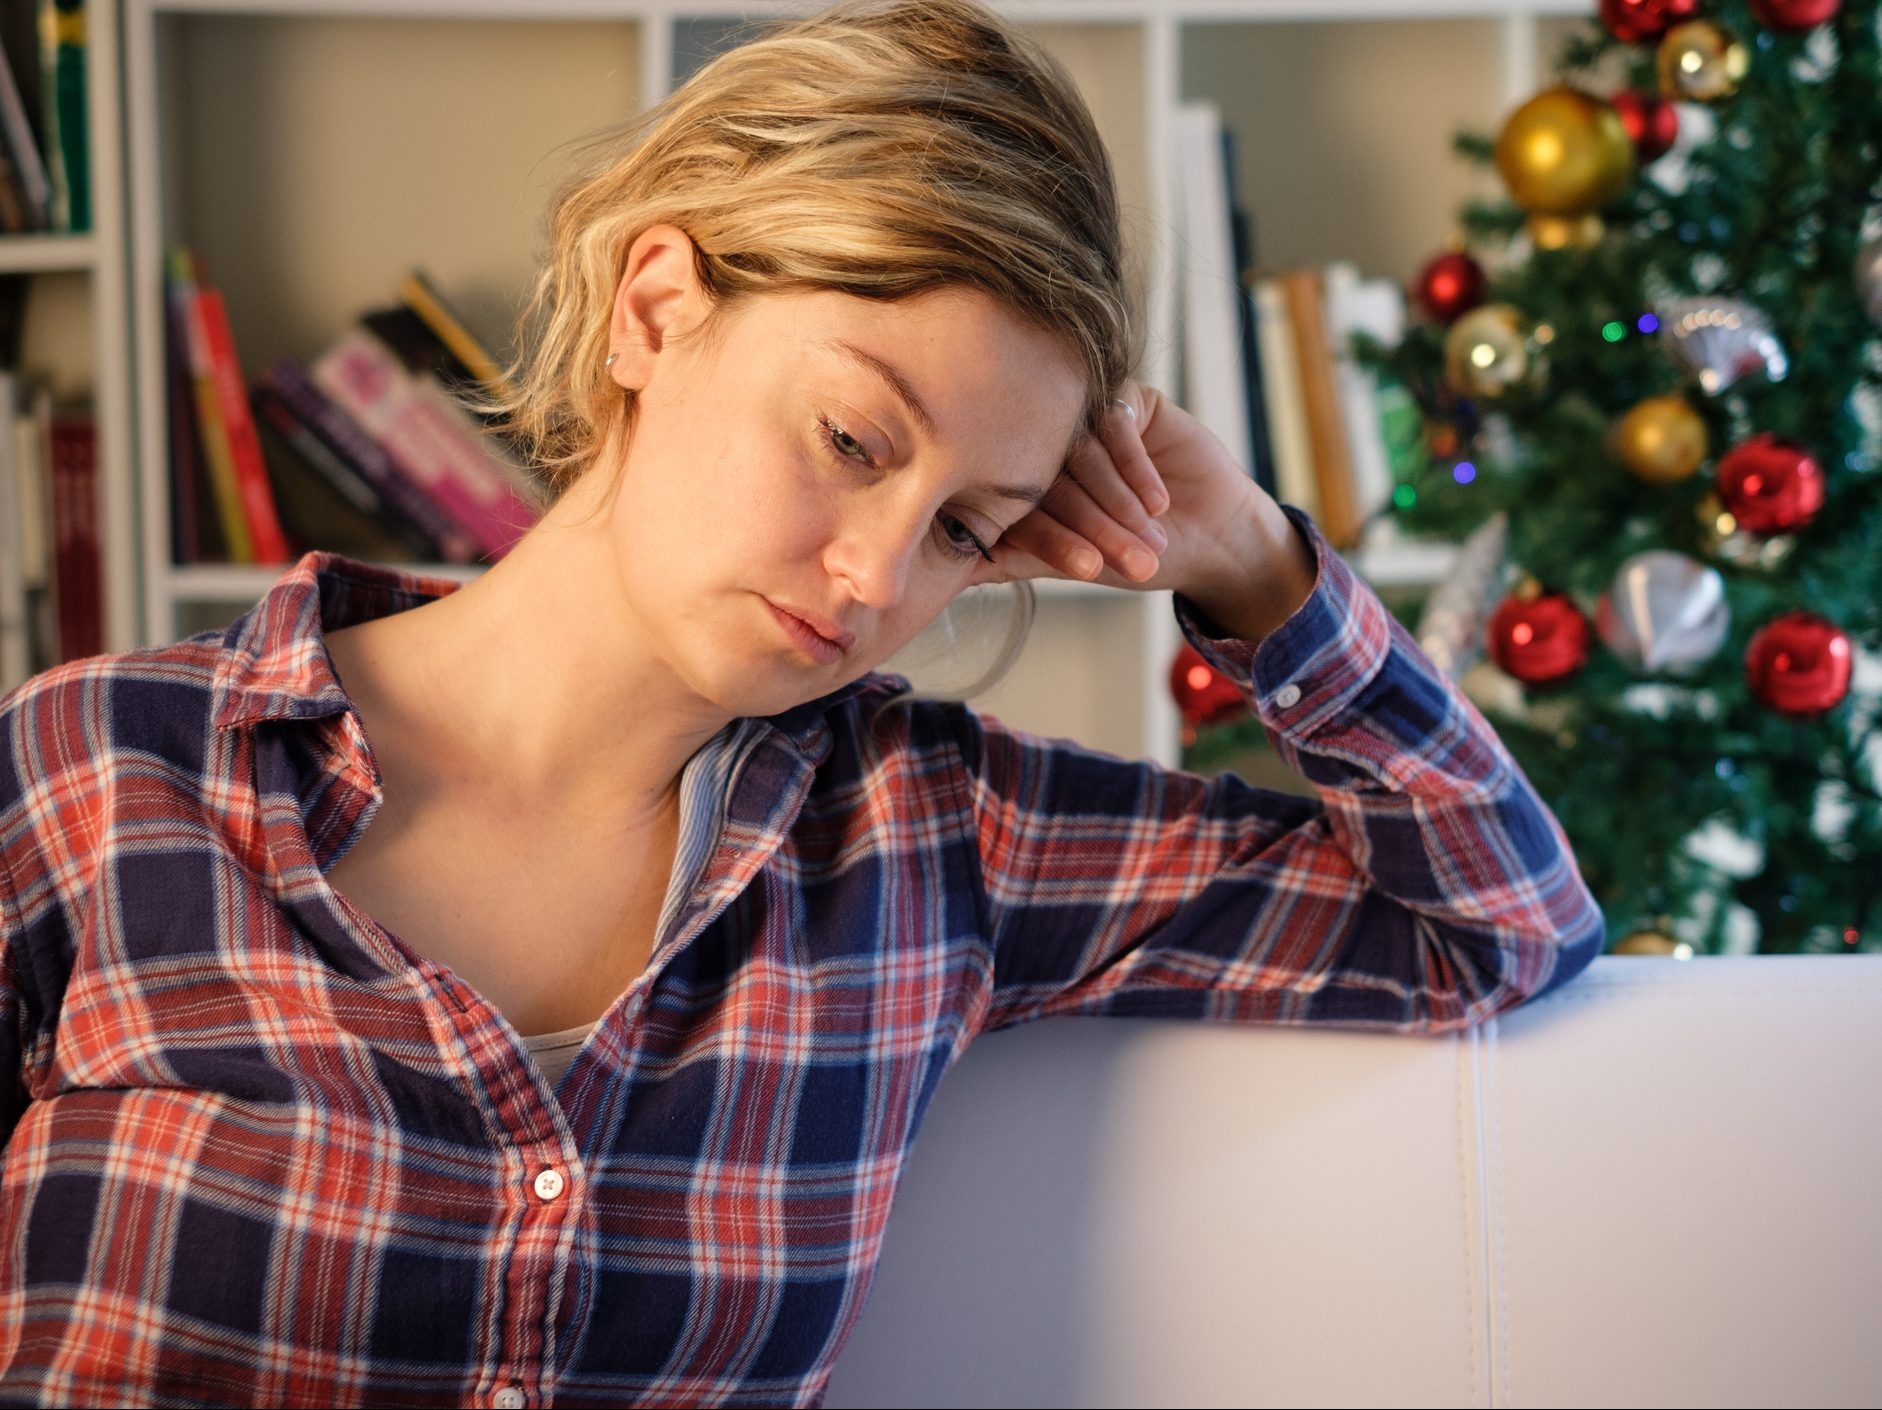 Holiday stress plus pandemic stress does not equal fun times